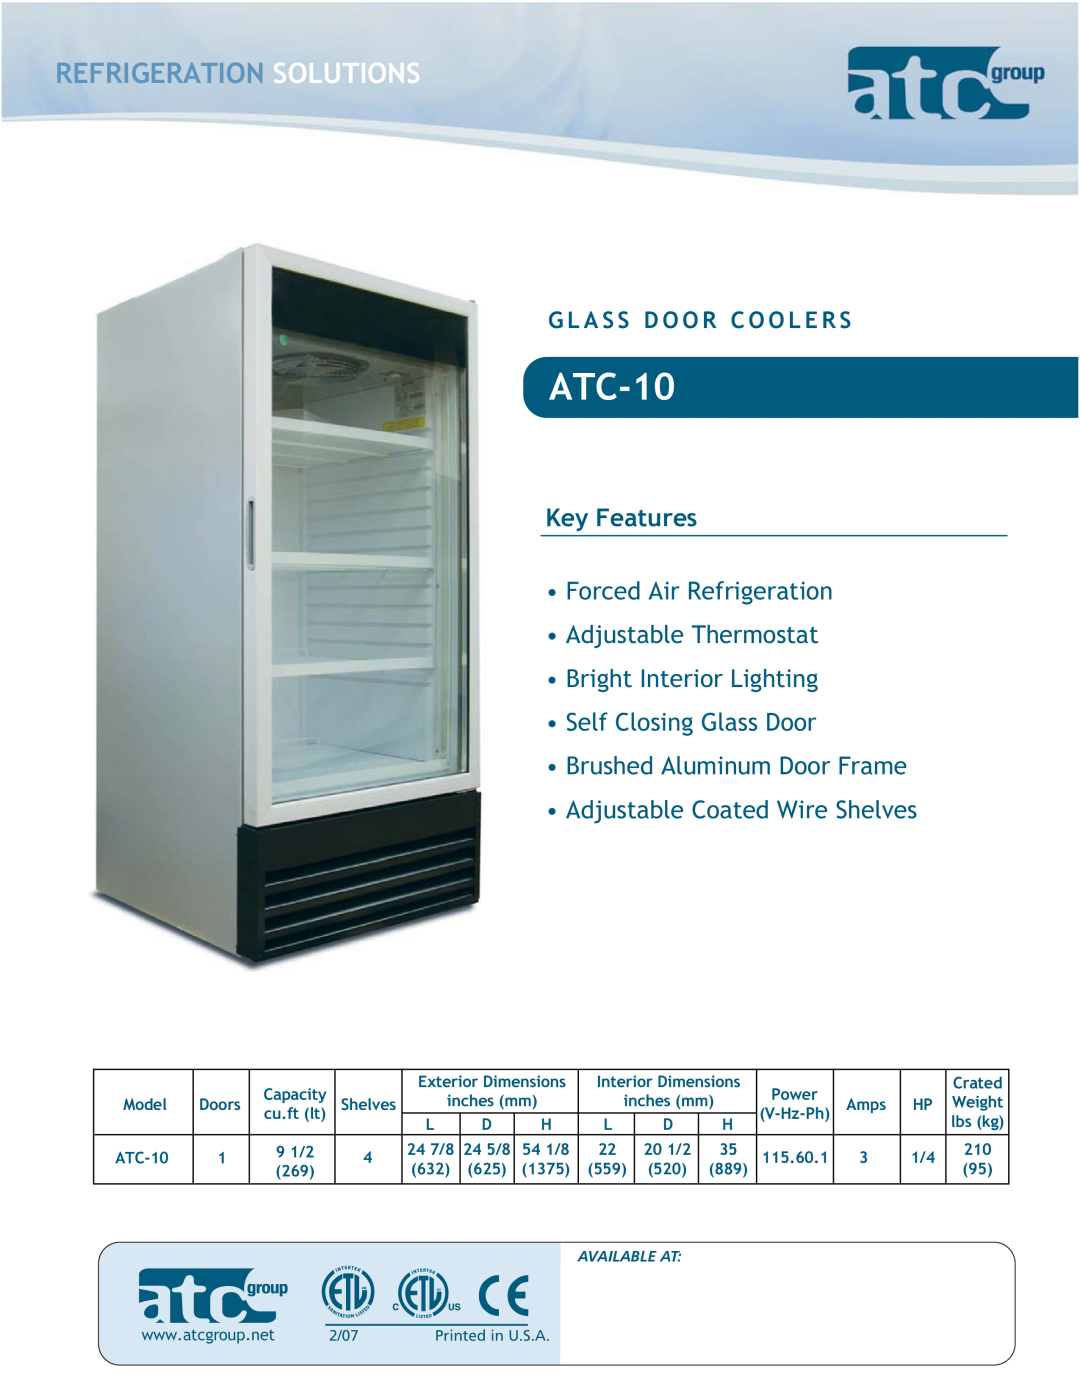 ATC Group ATC-10 dimensions Refrigeration Solutions, Key Features, • Forced Air Refrigeration, • Adjustable Thermostat 